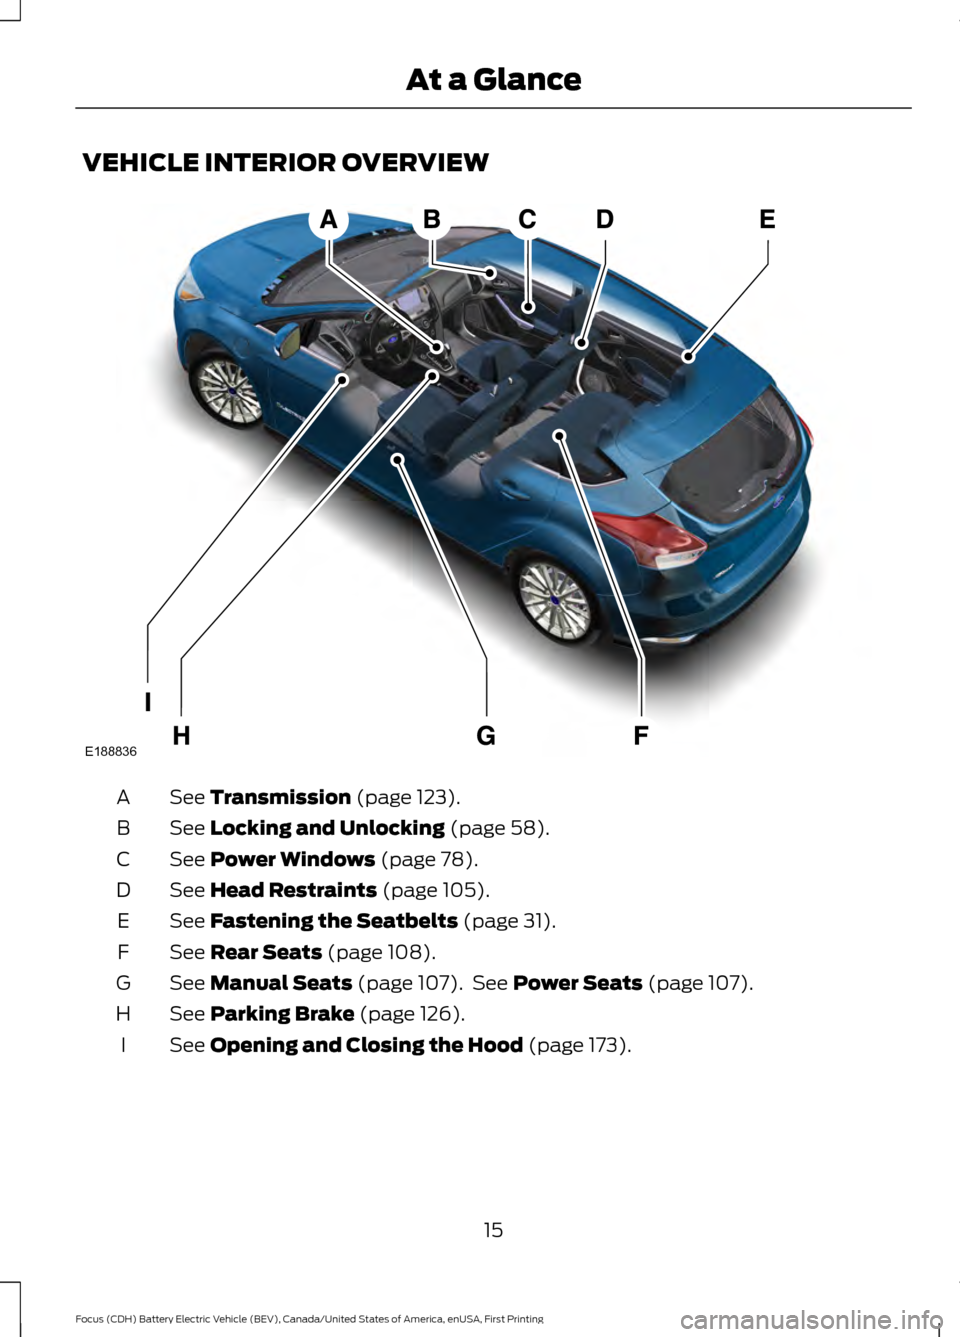 FORD FOCUS ELECTRIC 2016 3.G User Guide VEHICLE INTERIOR OVERVIEW
See Transmission (page 123).
A
See 
Locking and Unlocking (page 58).
B
See 
Power Windows (page 78).
C
See 
Head Restraints (page 105).
D
See 
Fastening the Seatbelts (page 3